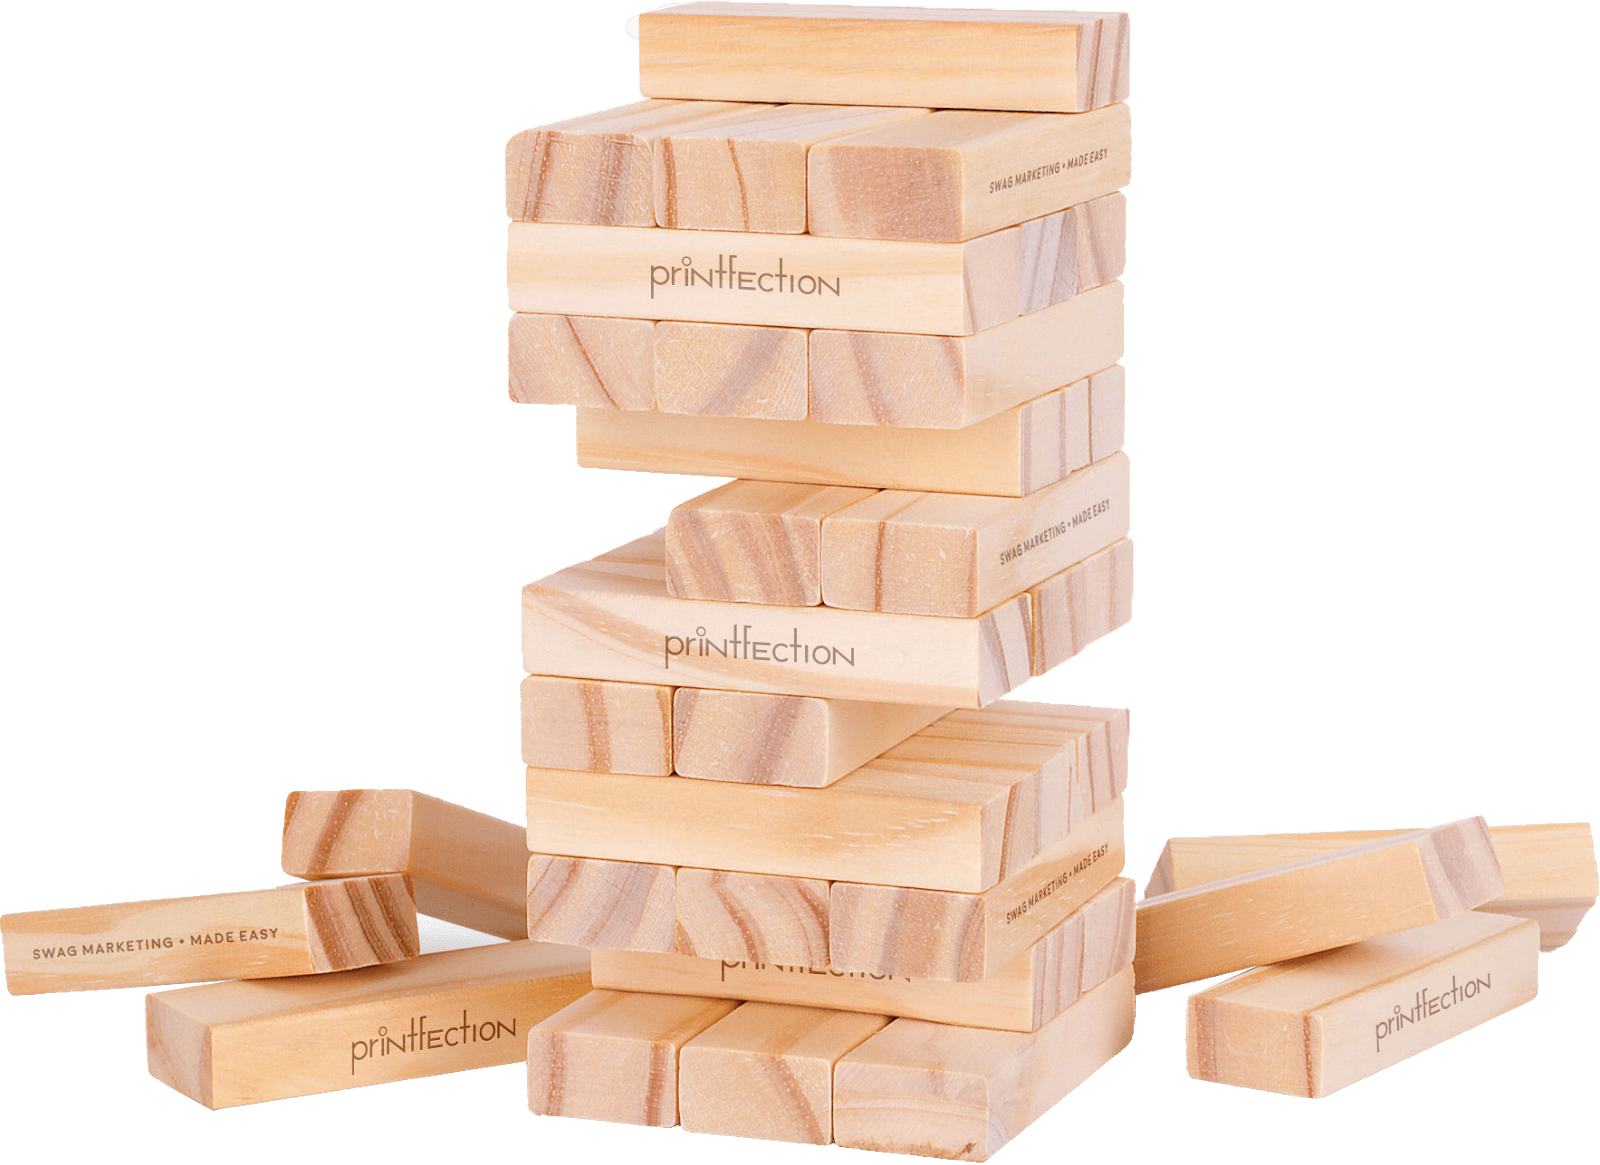 take your events to the next level with giant Jenga sets